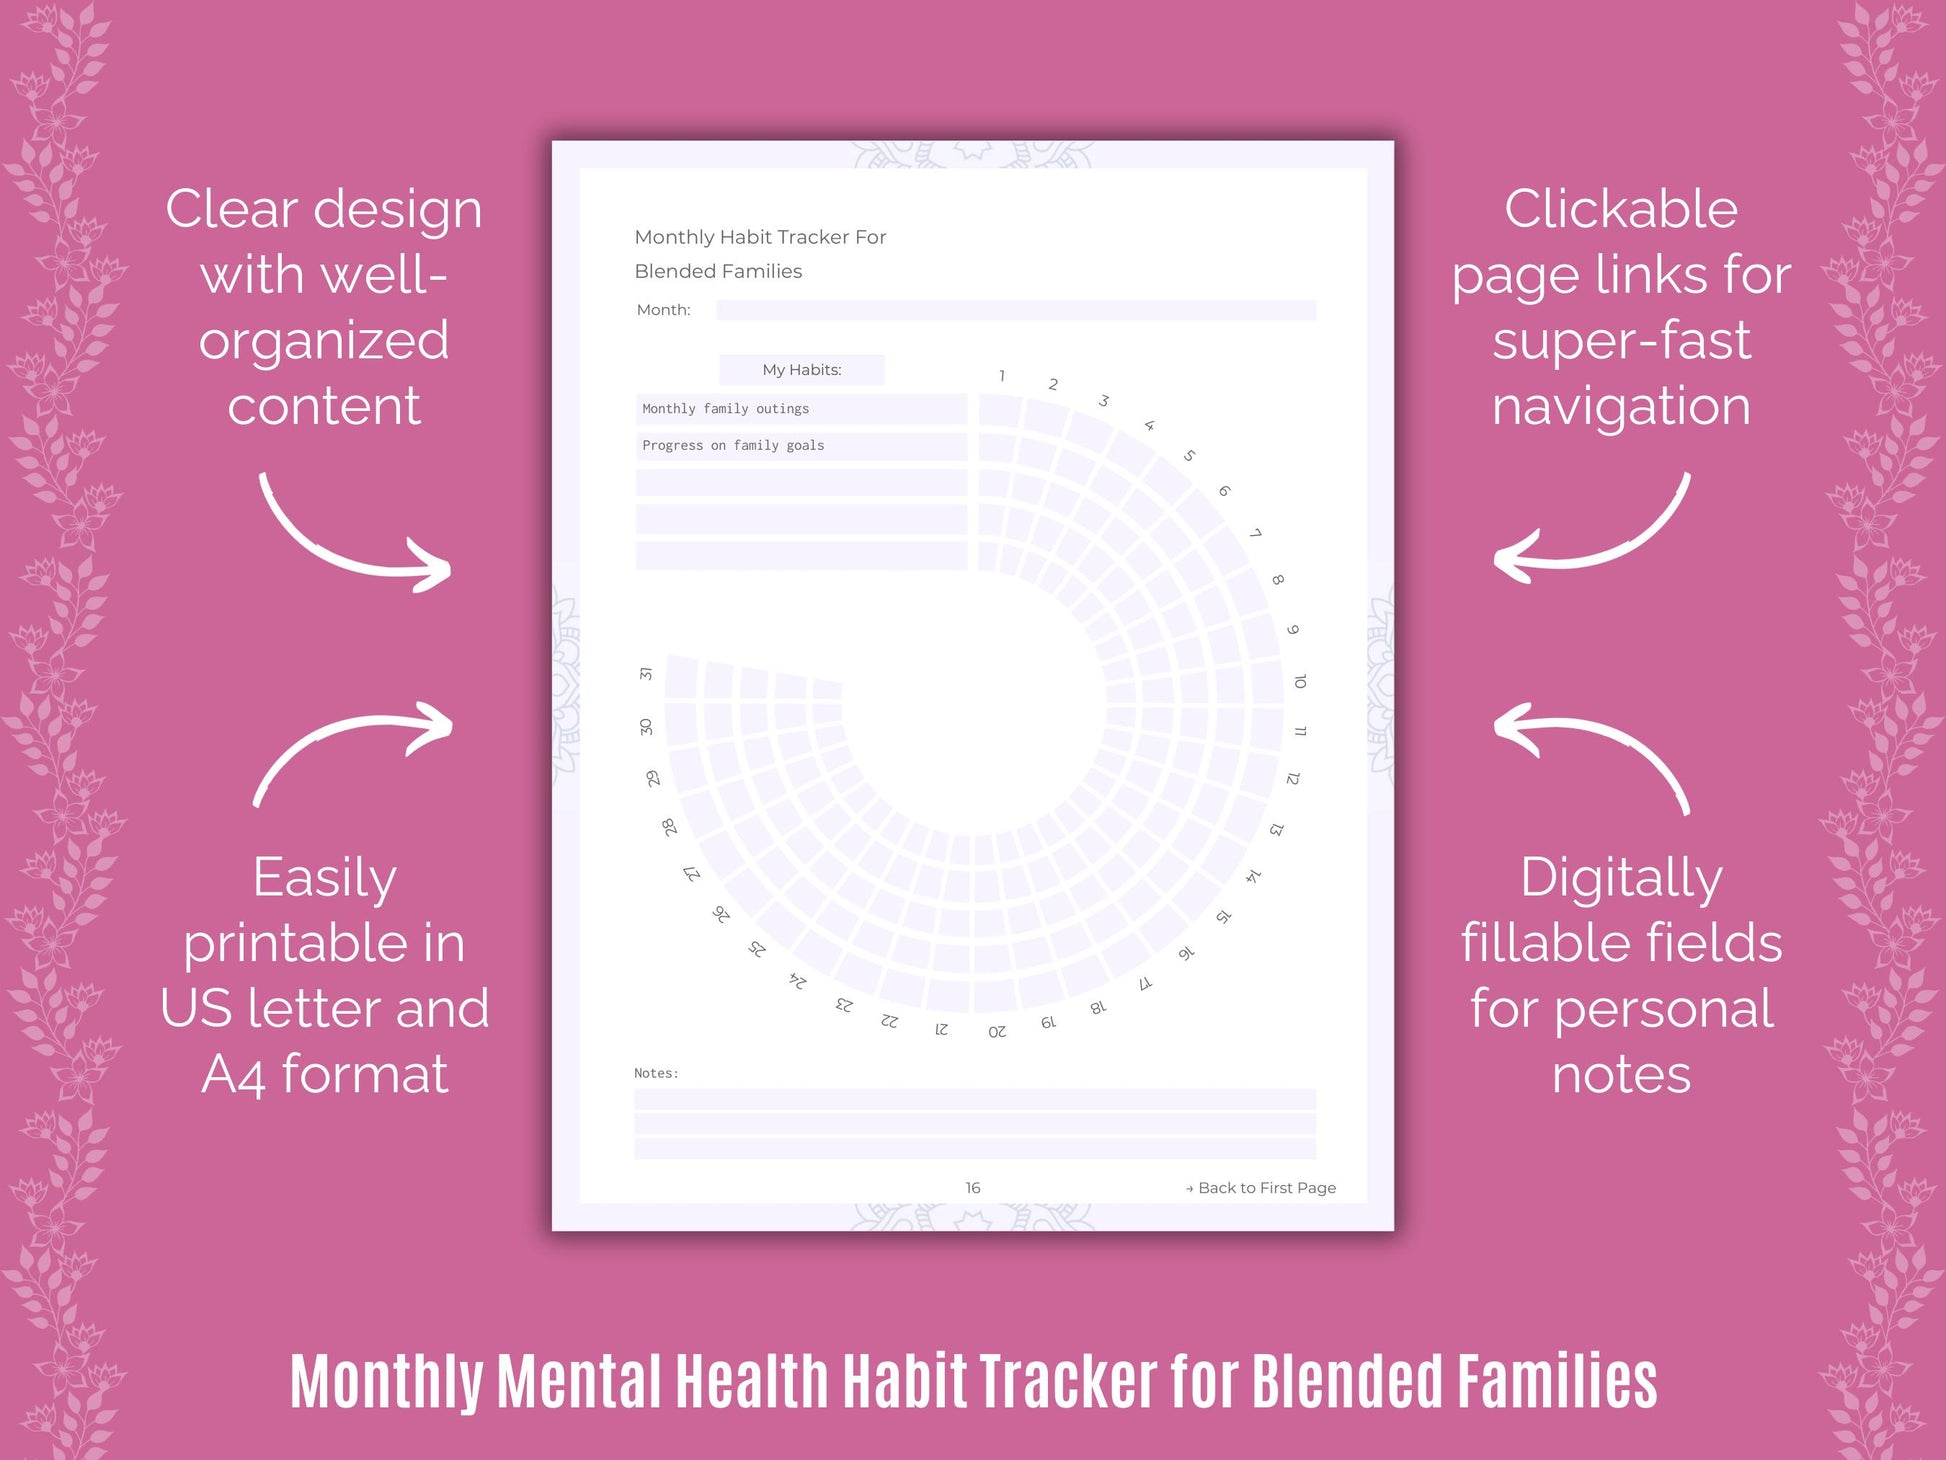 Cheat Sheet, Goal Setting, Tools, Therapy, Templates, Resources, Counseling, Workbooks, Planners, Journals, Journaling, Blended Families Mental Health, Notes